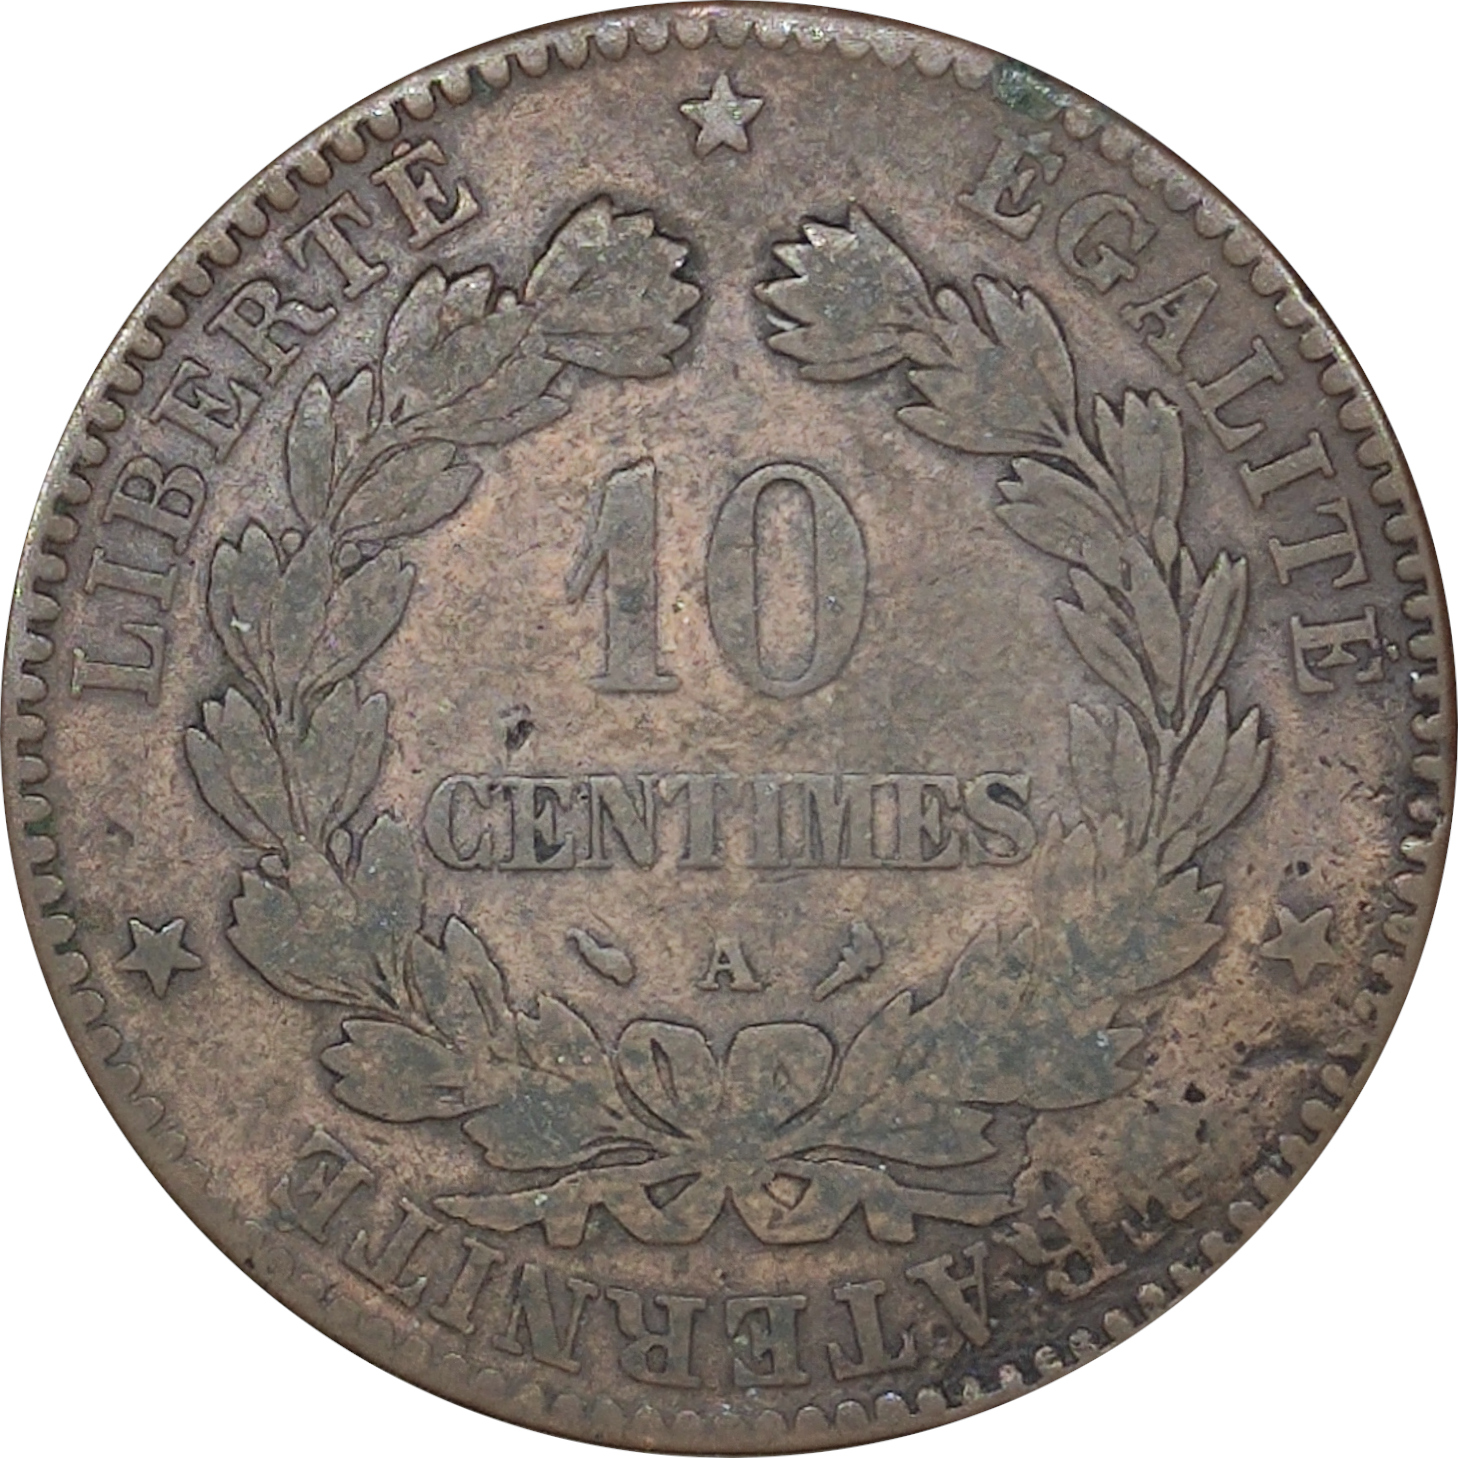 10 centimes - Ceres